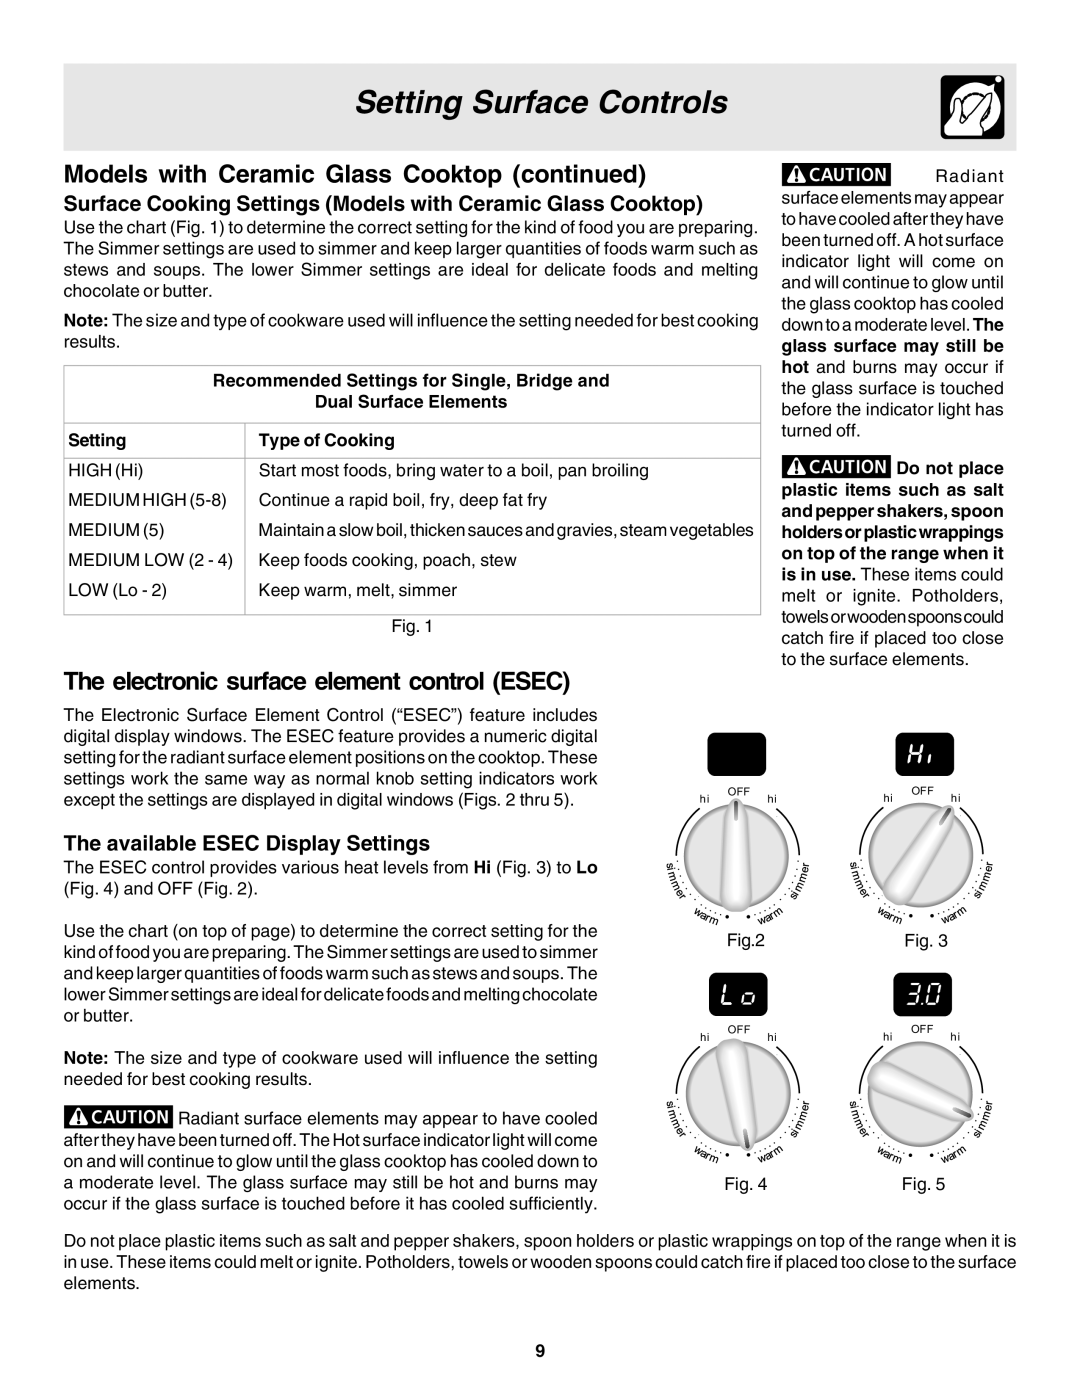 Frigidaire 318203860 Models with Ceramic Glass Cooktop continued, The electronic surface element control ESEC, Setting 